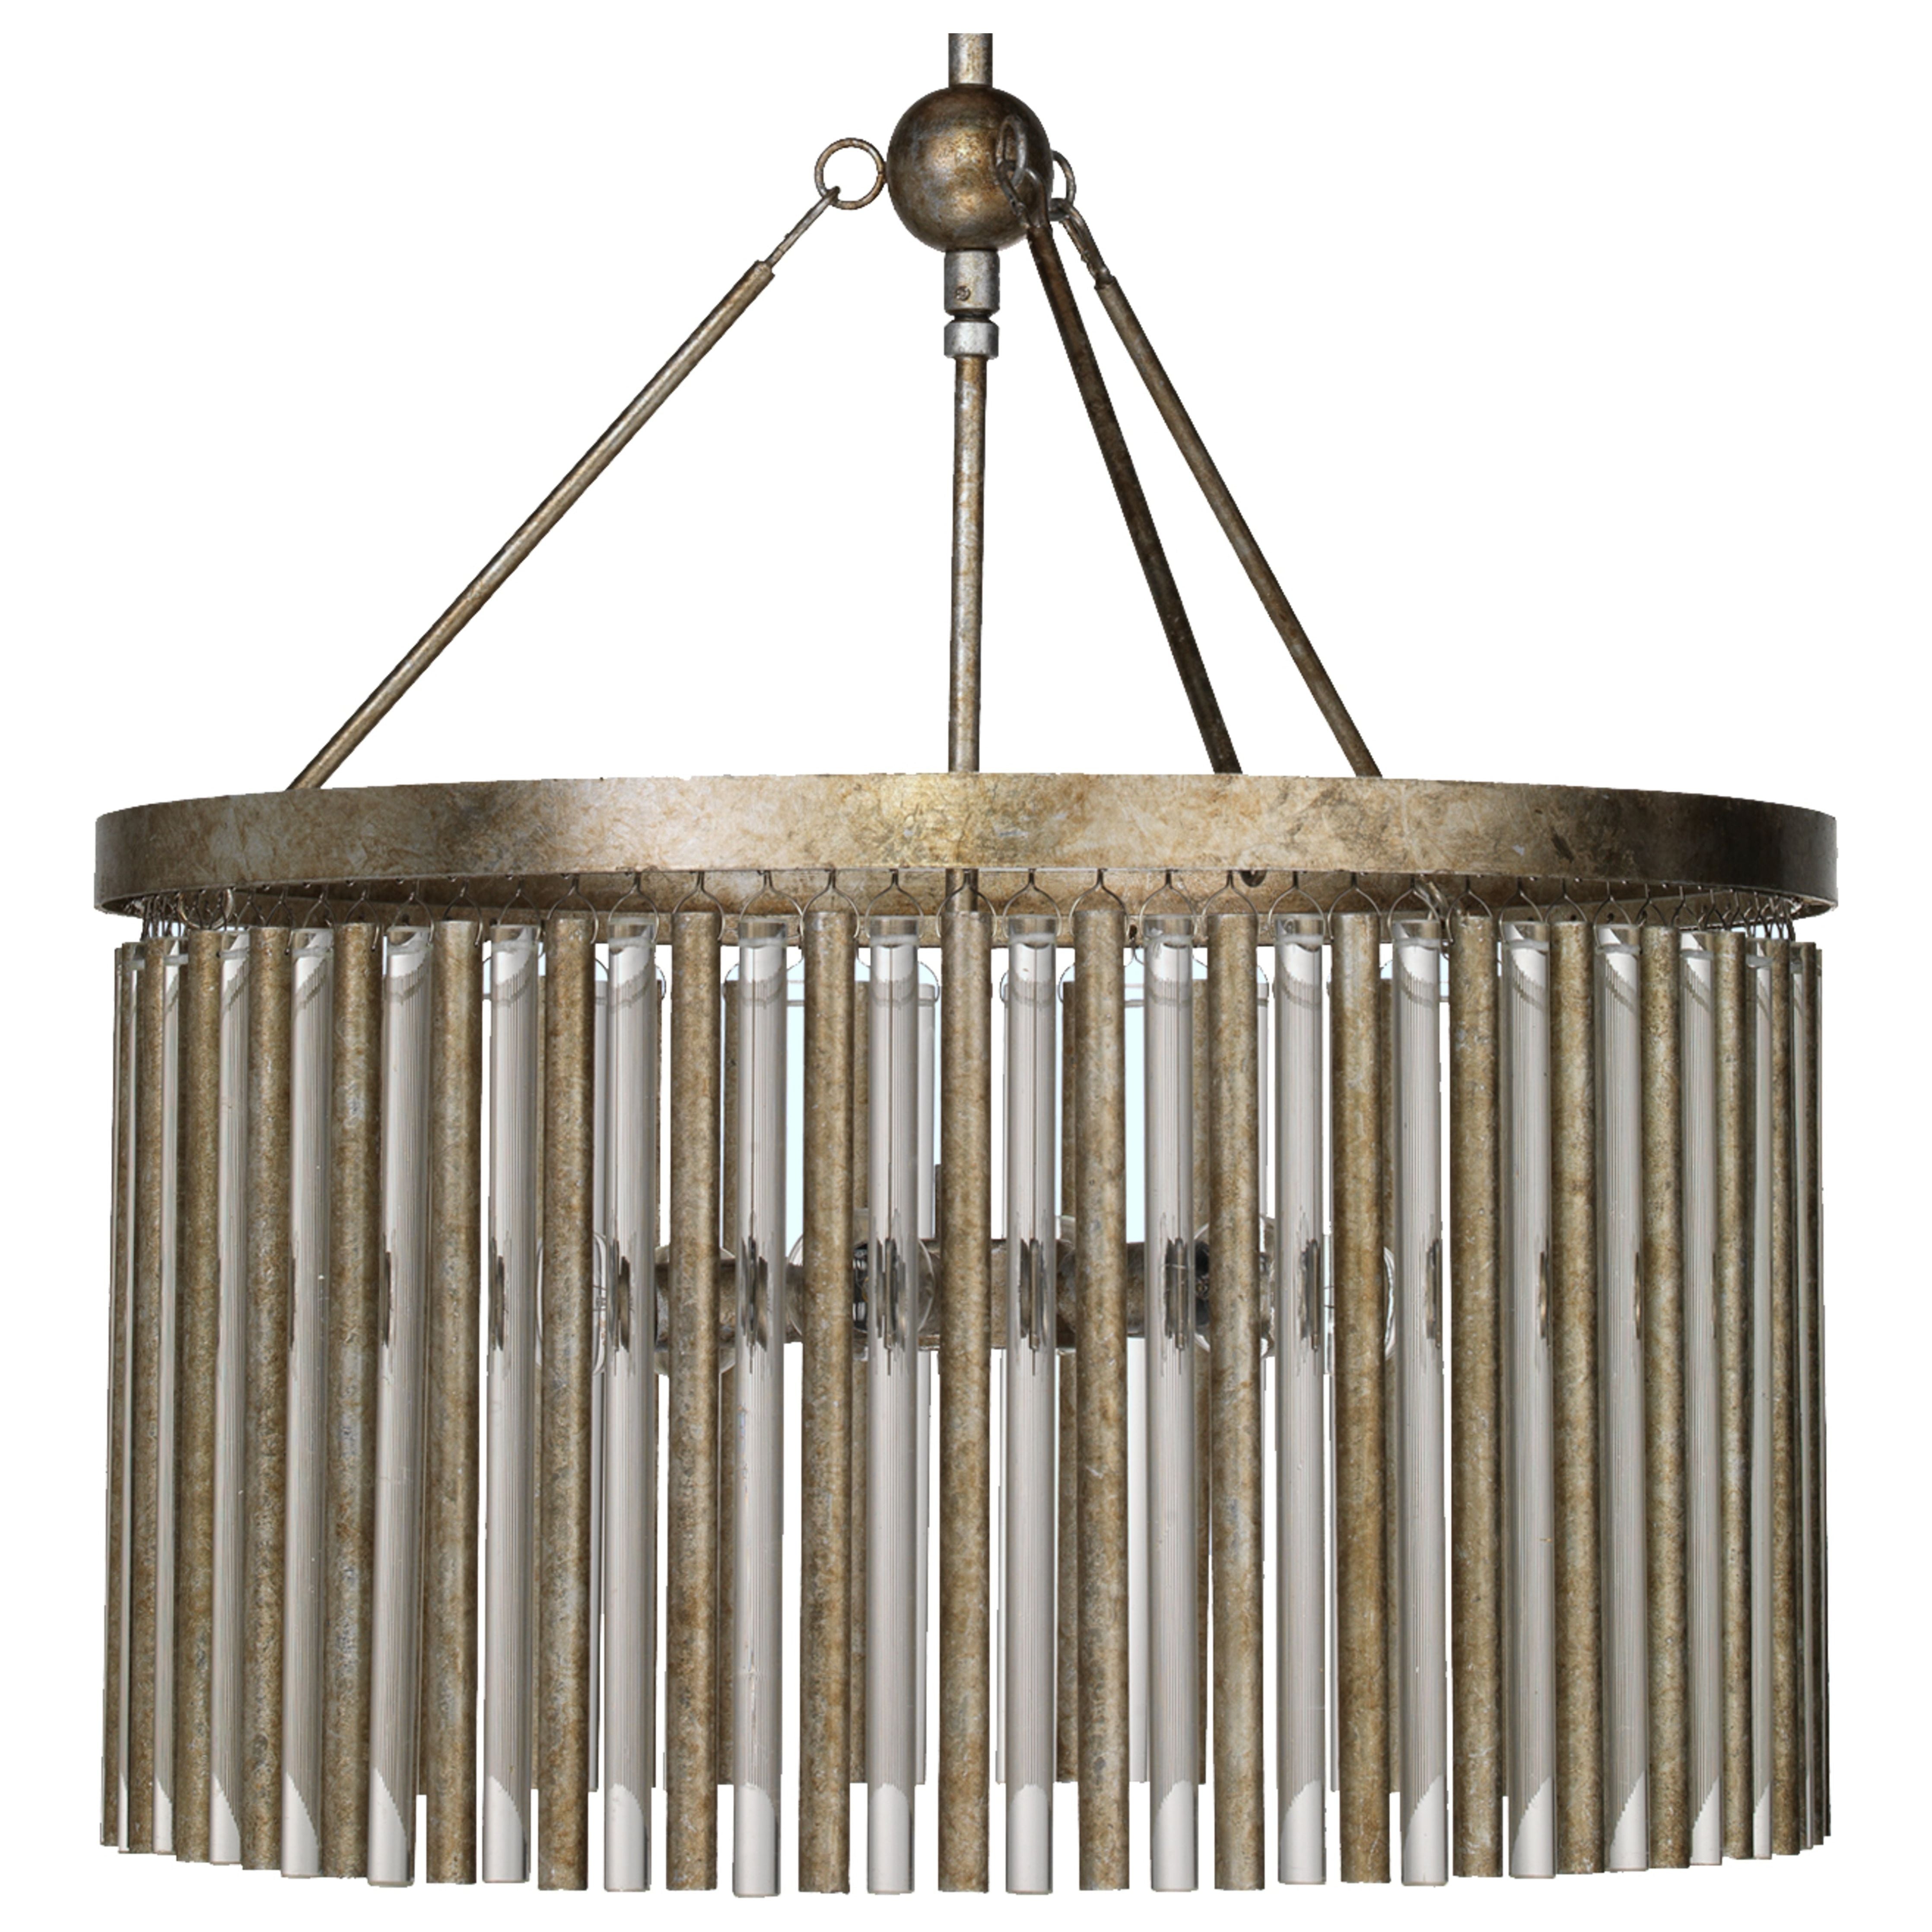 Jamie Young Company - 5ANDR-CHCH - Andromeda Chandelier - Andromeda - Champagne